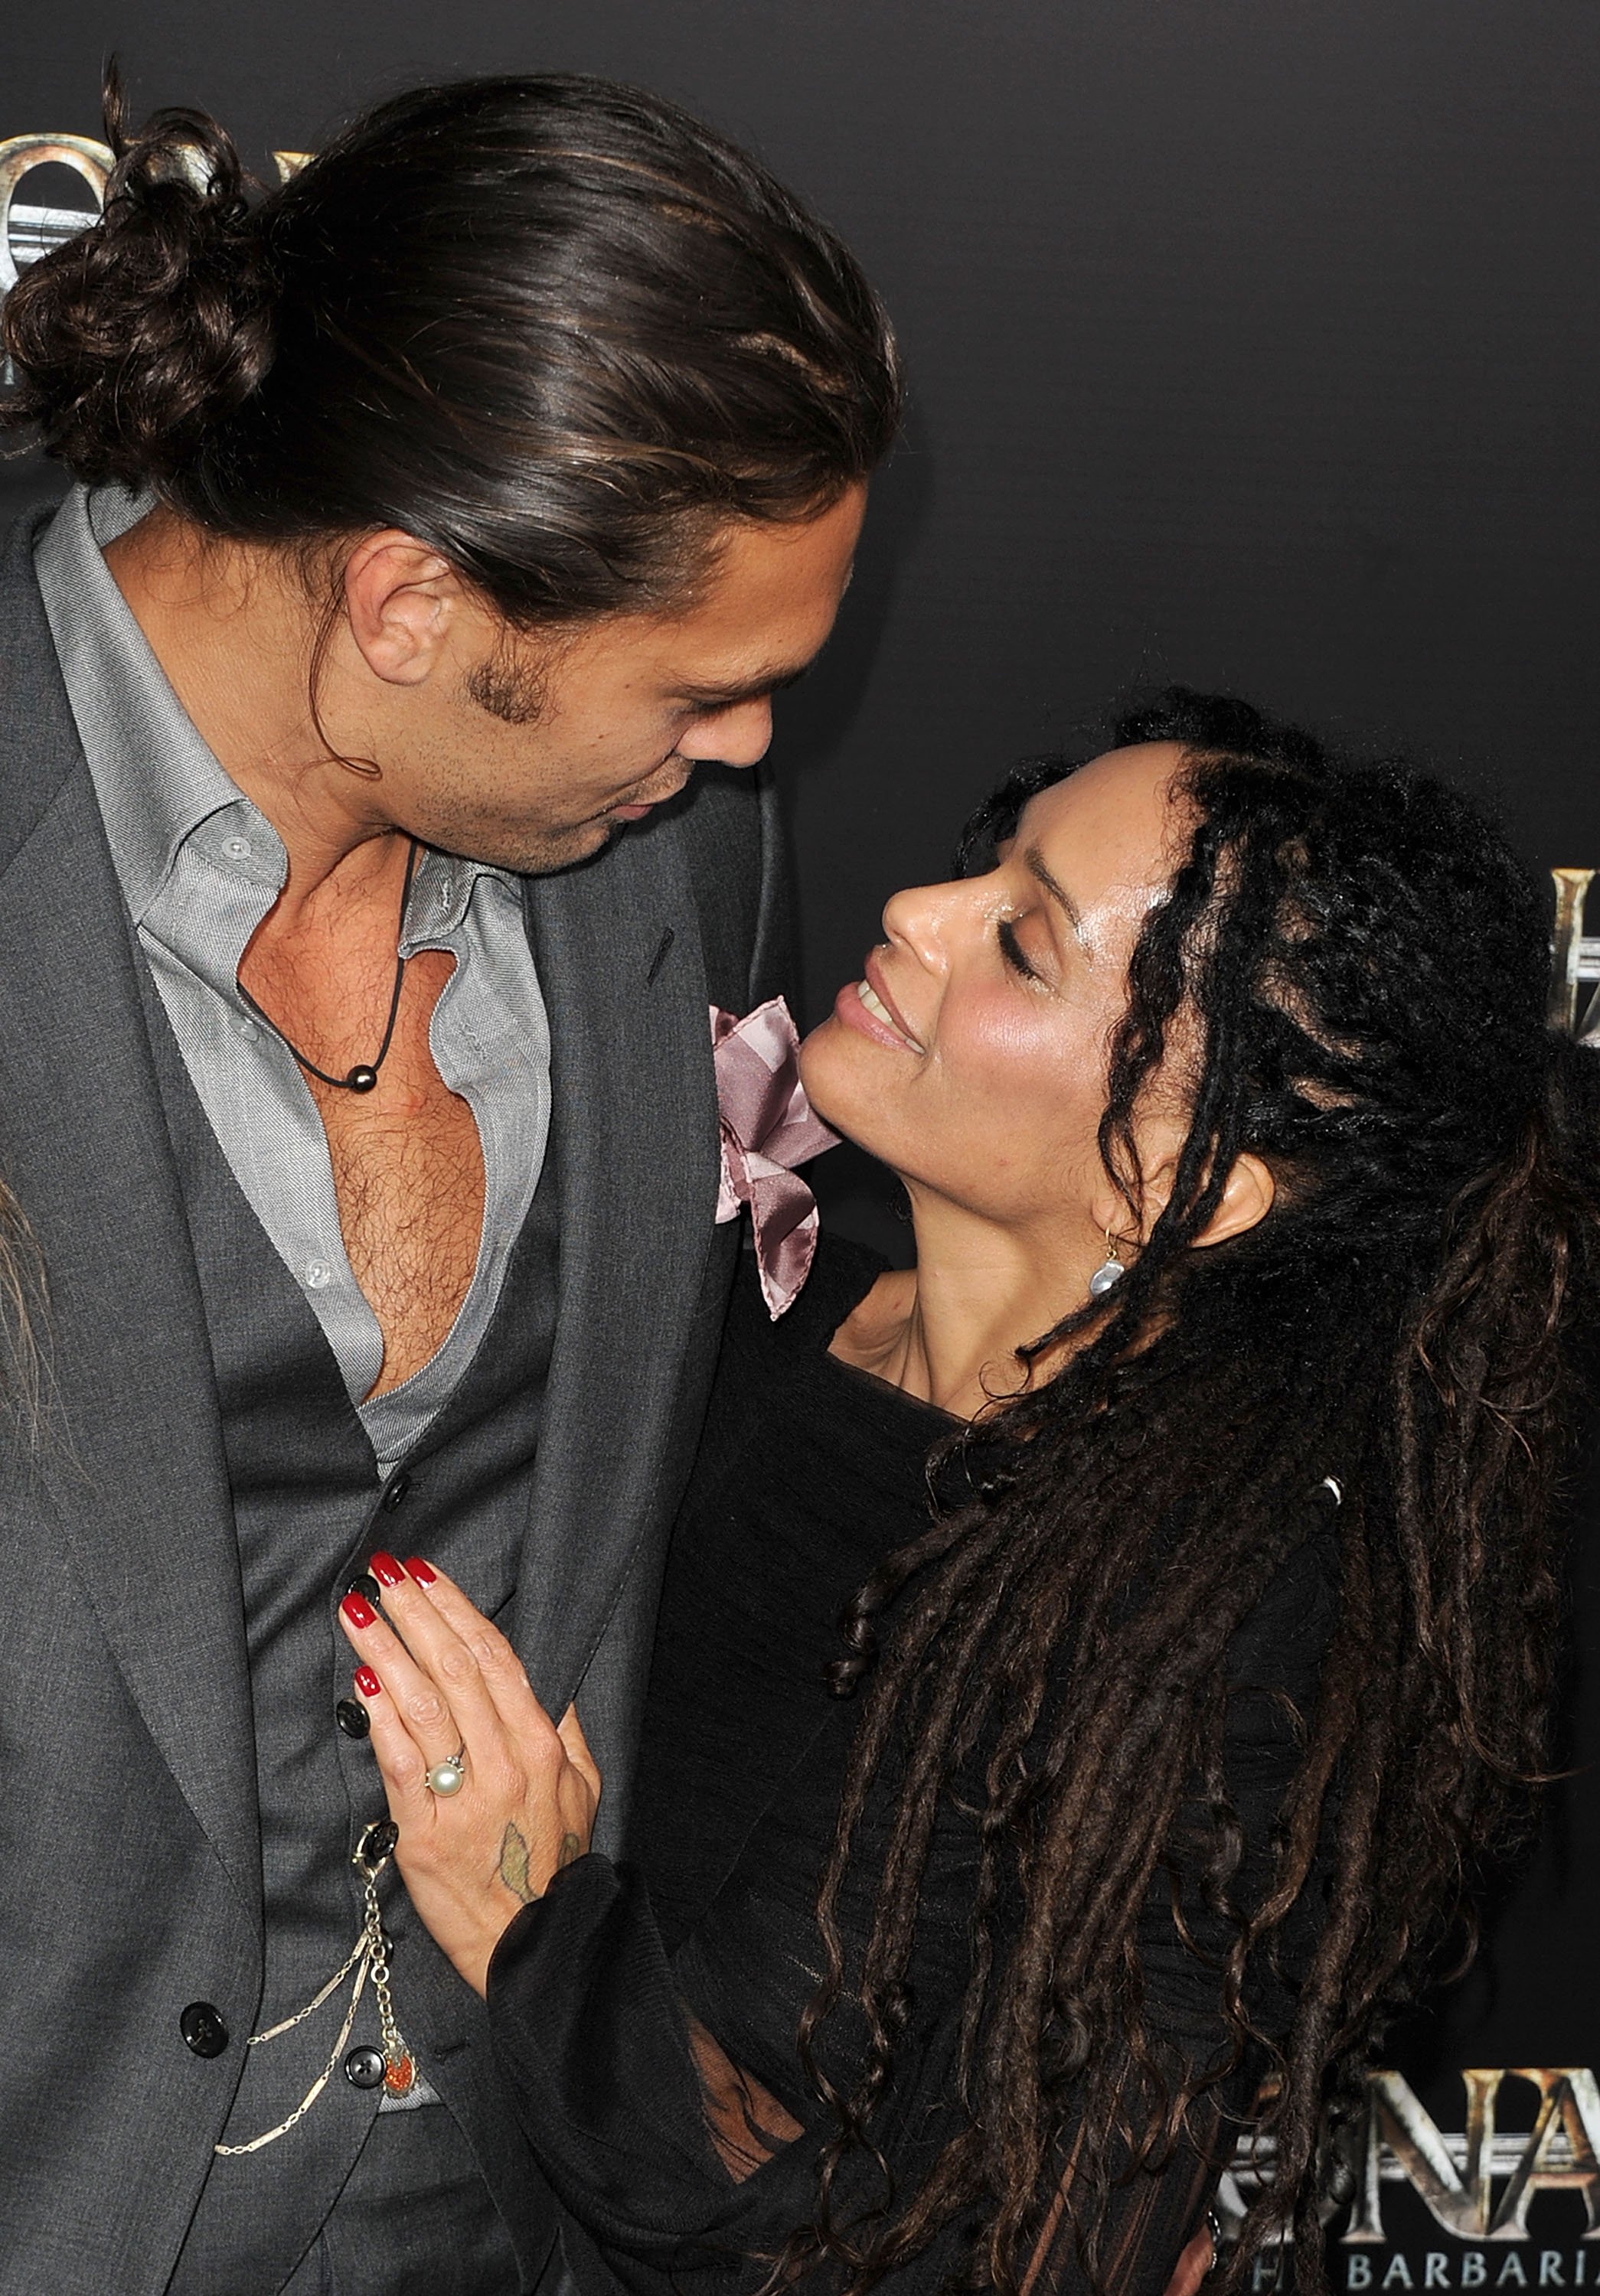 Actor Jason Momoa and actress Lisa Bonet attend the world premiere of "Conan The Barbarian" held at Regal Cinemas LA Live on August 11, 2011 in Los Angeles, California | Source: Getty Images